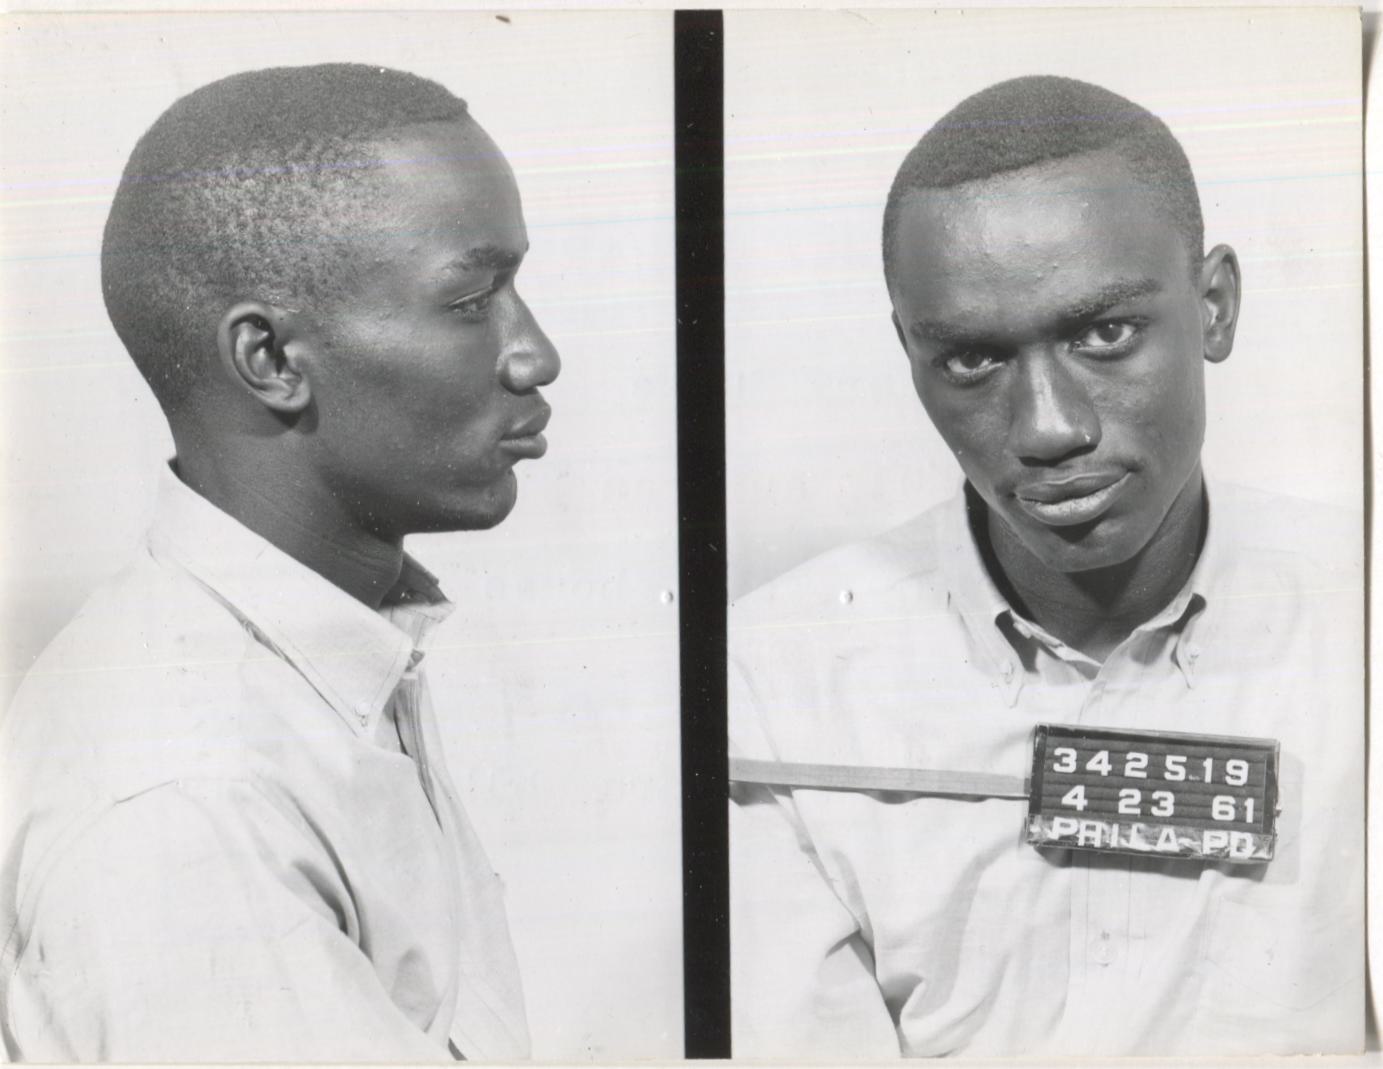 Henry Burke Mugshot - Arrested on 4/23/1961 for Being a Proprietor of a Gambling House